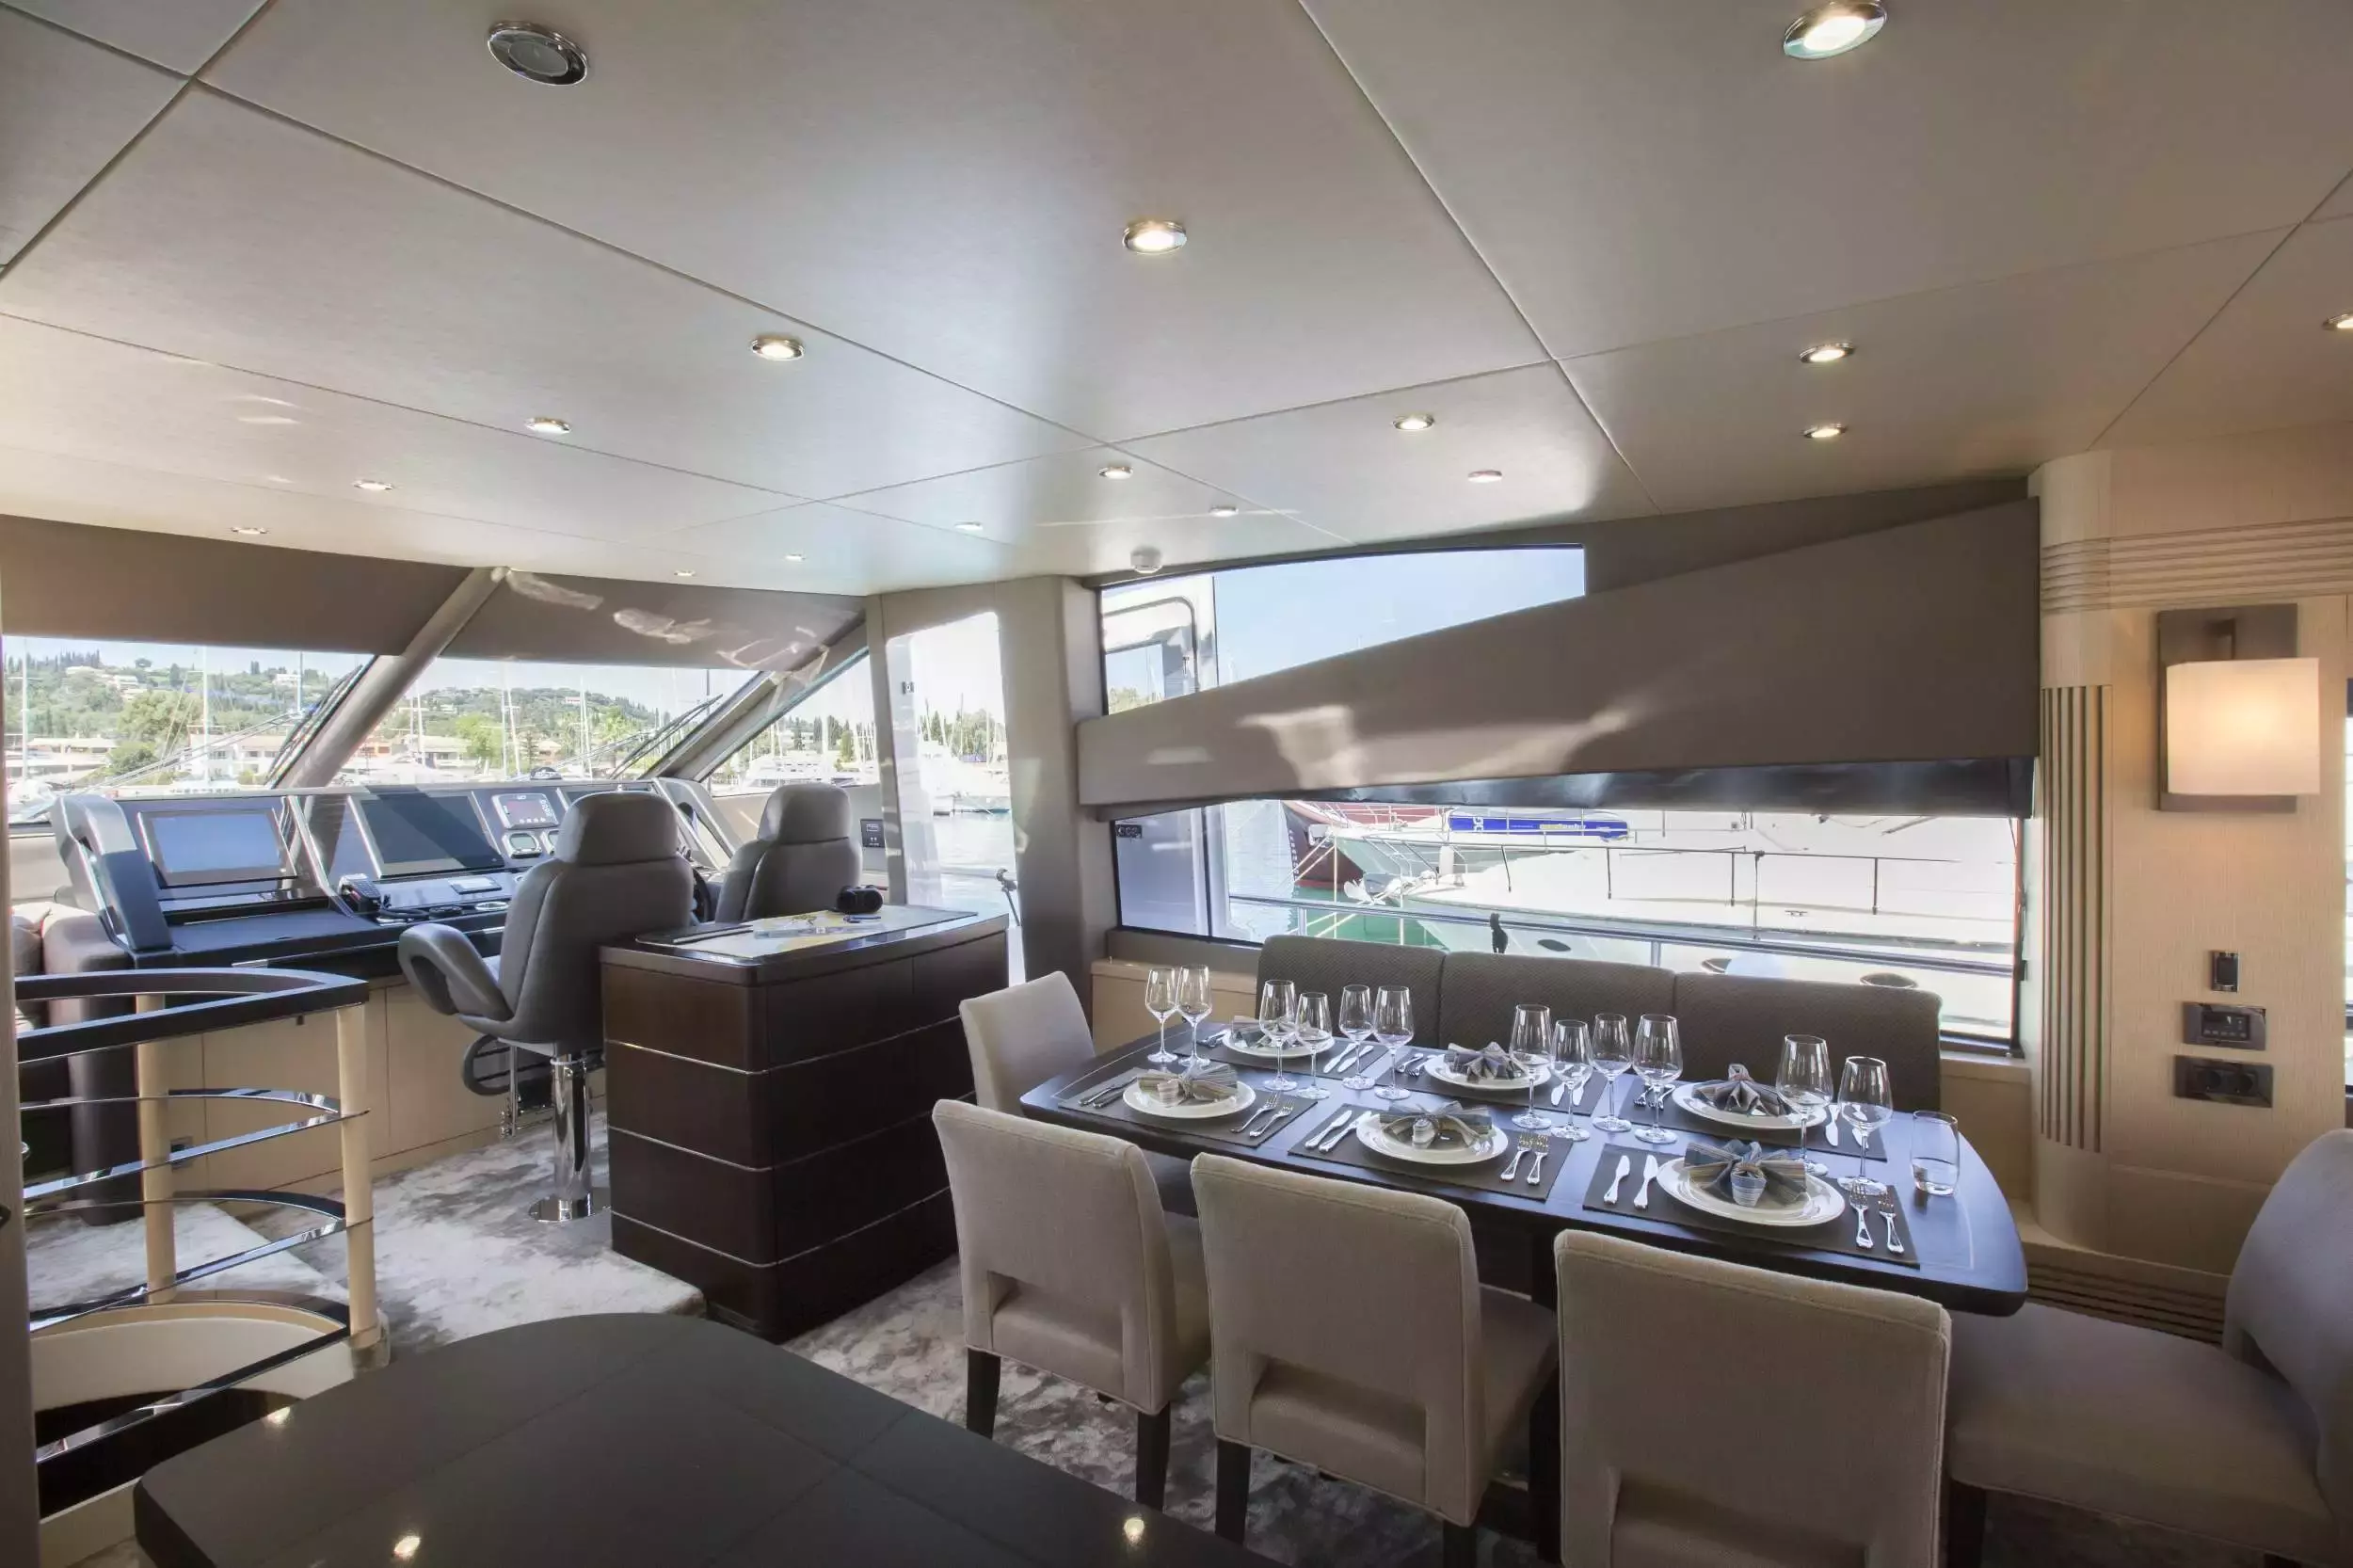 Finezza by Sunseeker - Top rates for a Charter of a private Motor Yacht in Greece